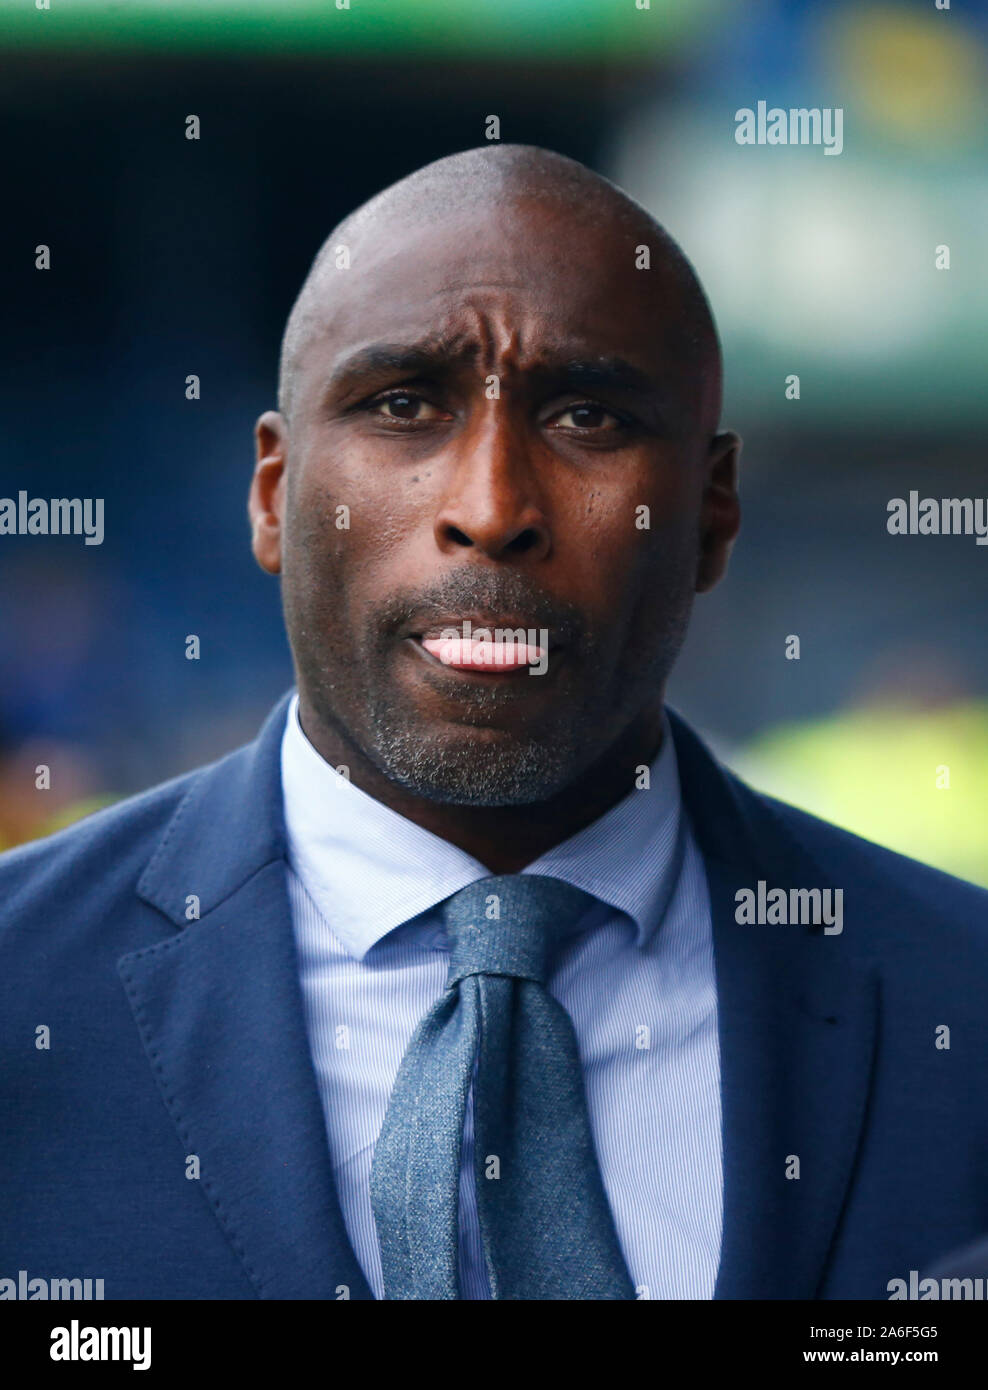 SOUTHEND UNITED KINGDOM. OCTOBER 26 Sol Campbell New manager of Southend United during English Sky Bet League One between Southend United and Ipswich Town at Roots Hall Stadium, Southend, England on 26 October 2019 Credit: Action Foto Sport/Alamy Live News Stock Photo